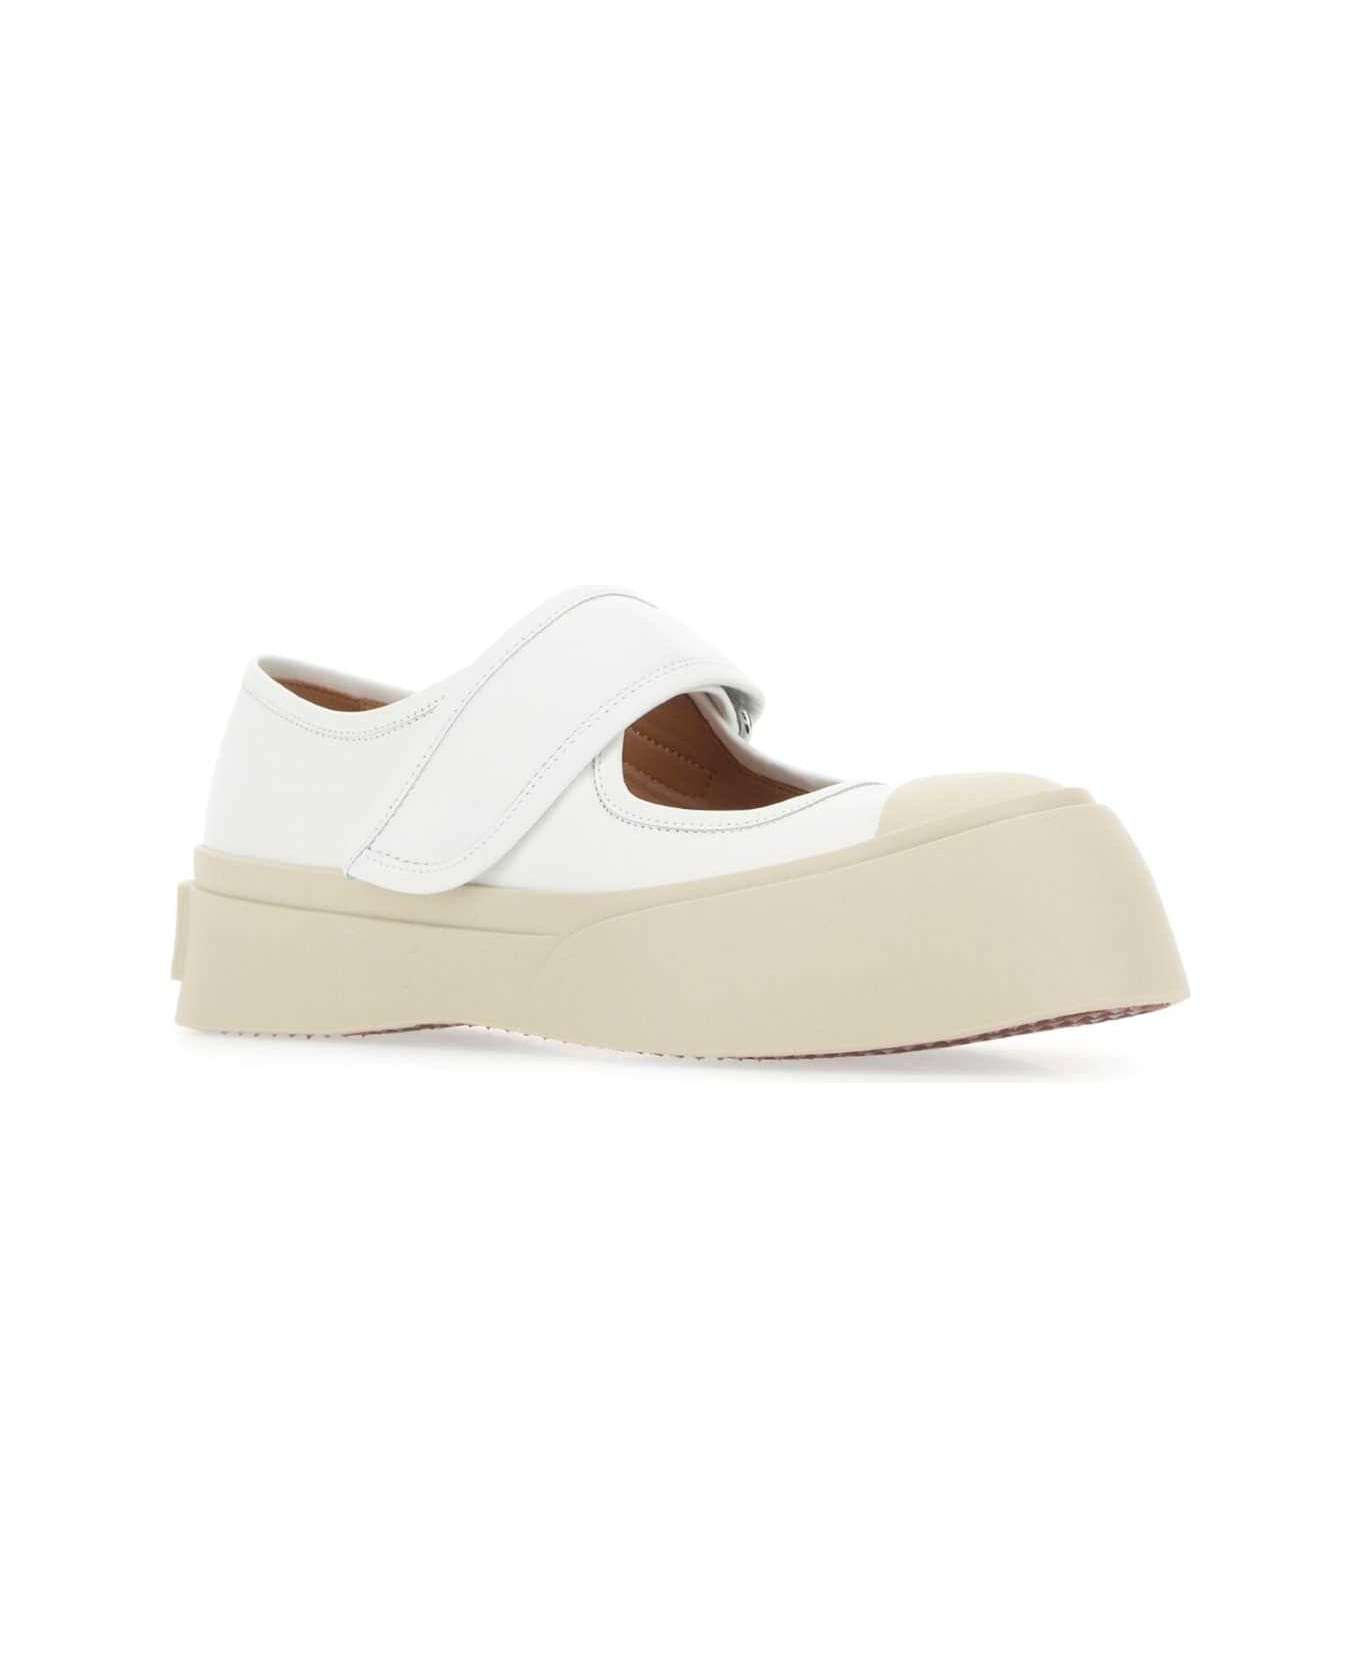 Marni White Leather Mary Jane Sneakers - 00W01 ウェッジシューズ